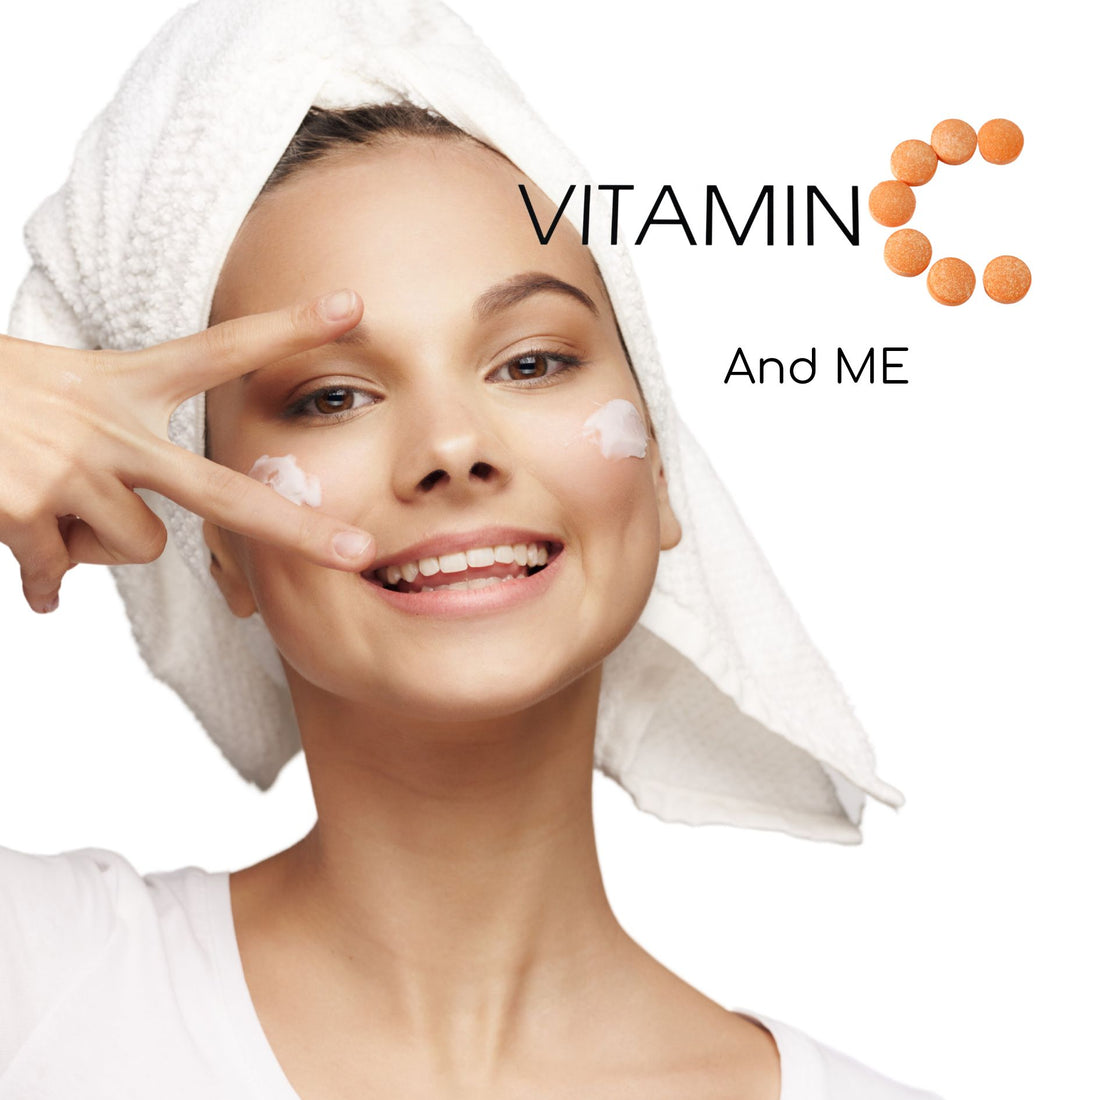 You and Vitamin C. What's so good about our Vitamin C kits?